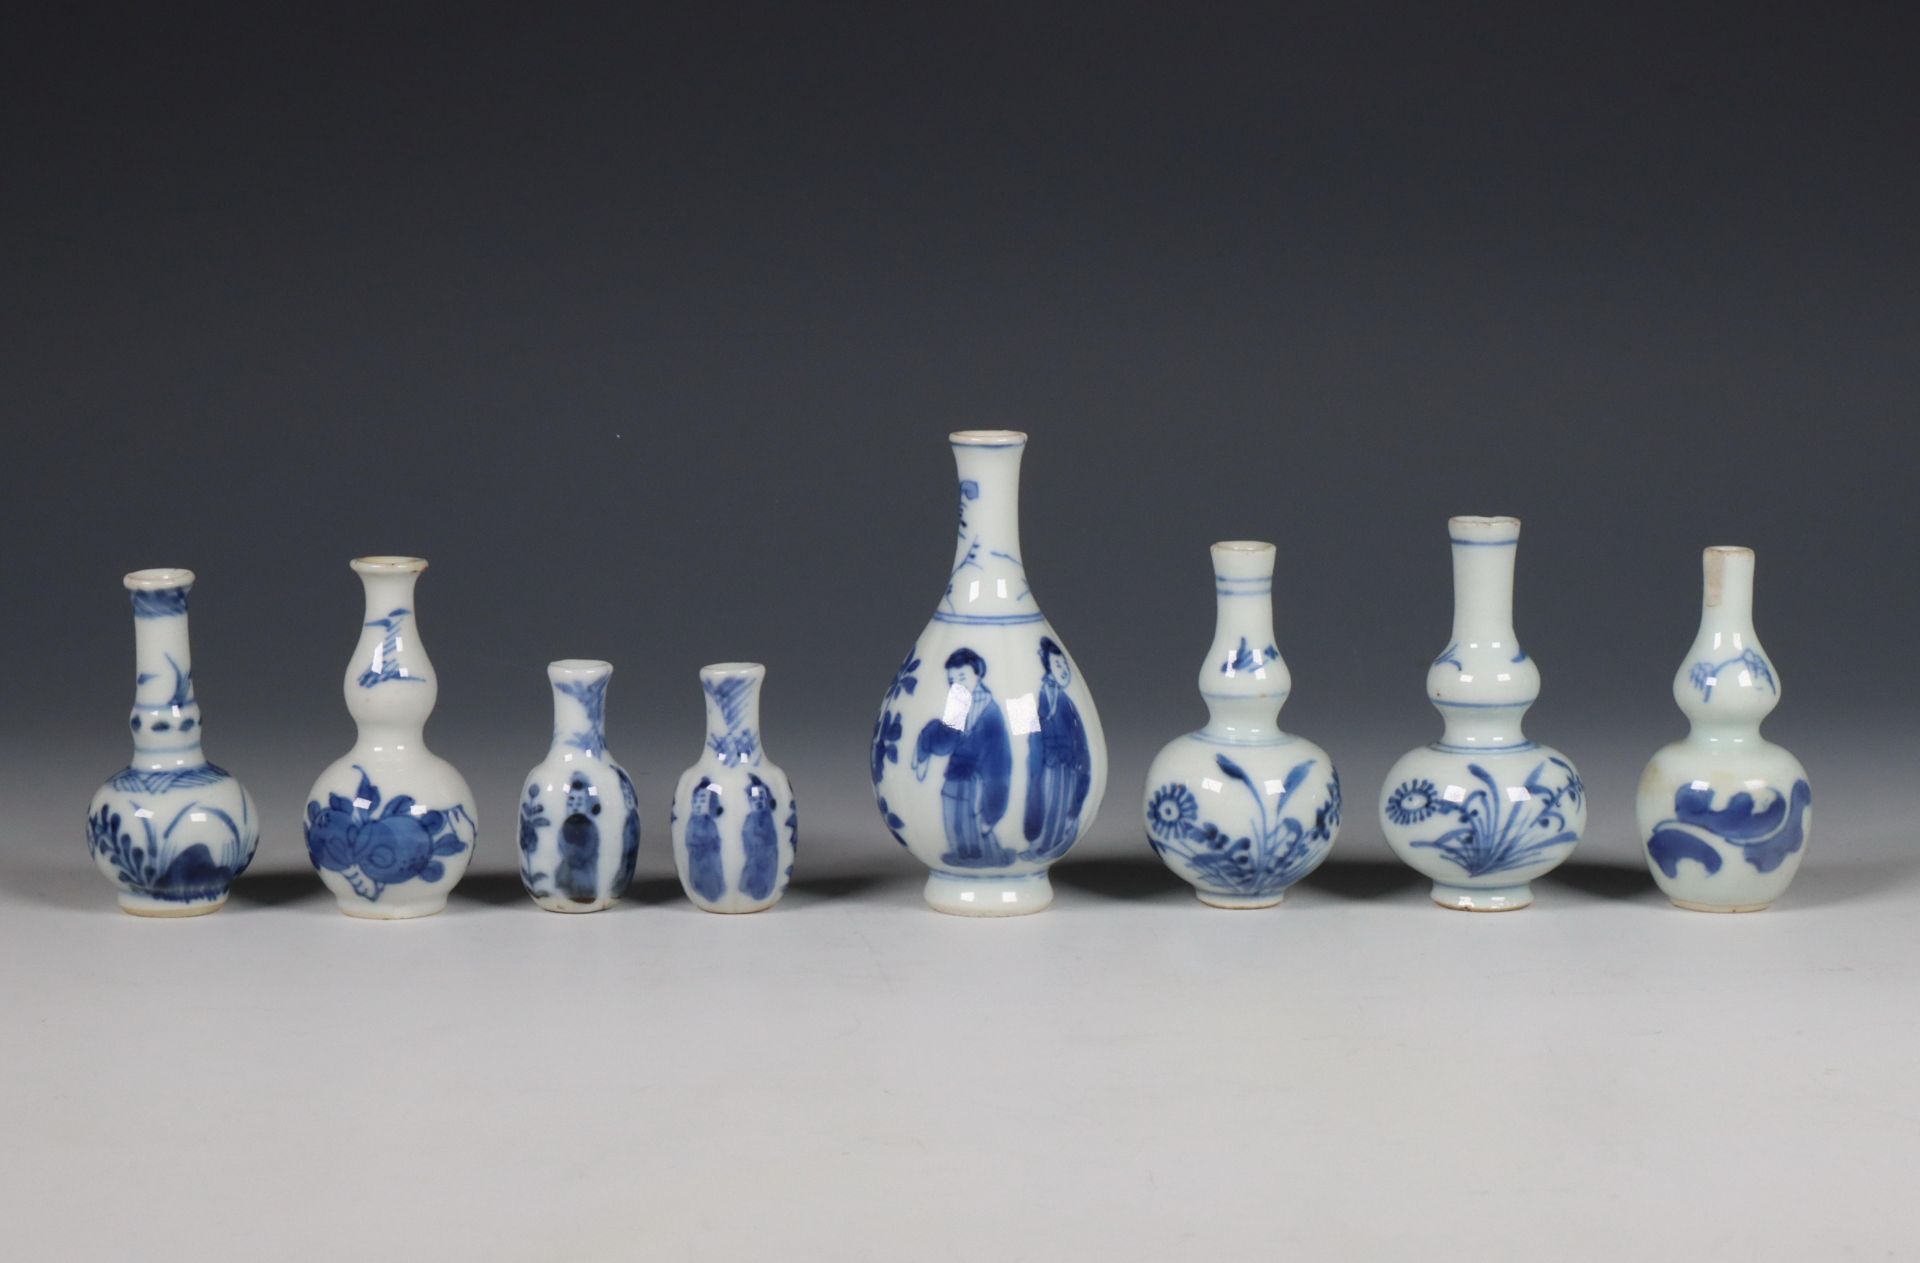 China, collection of blue and white porcelain miniature vases, 18th century,